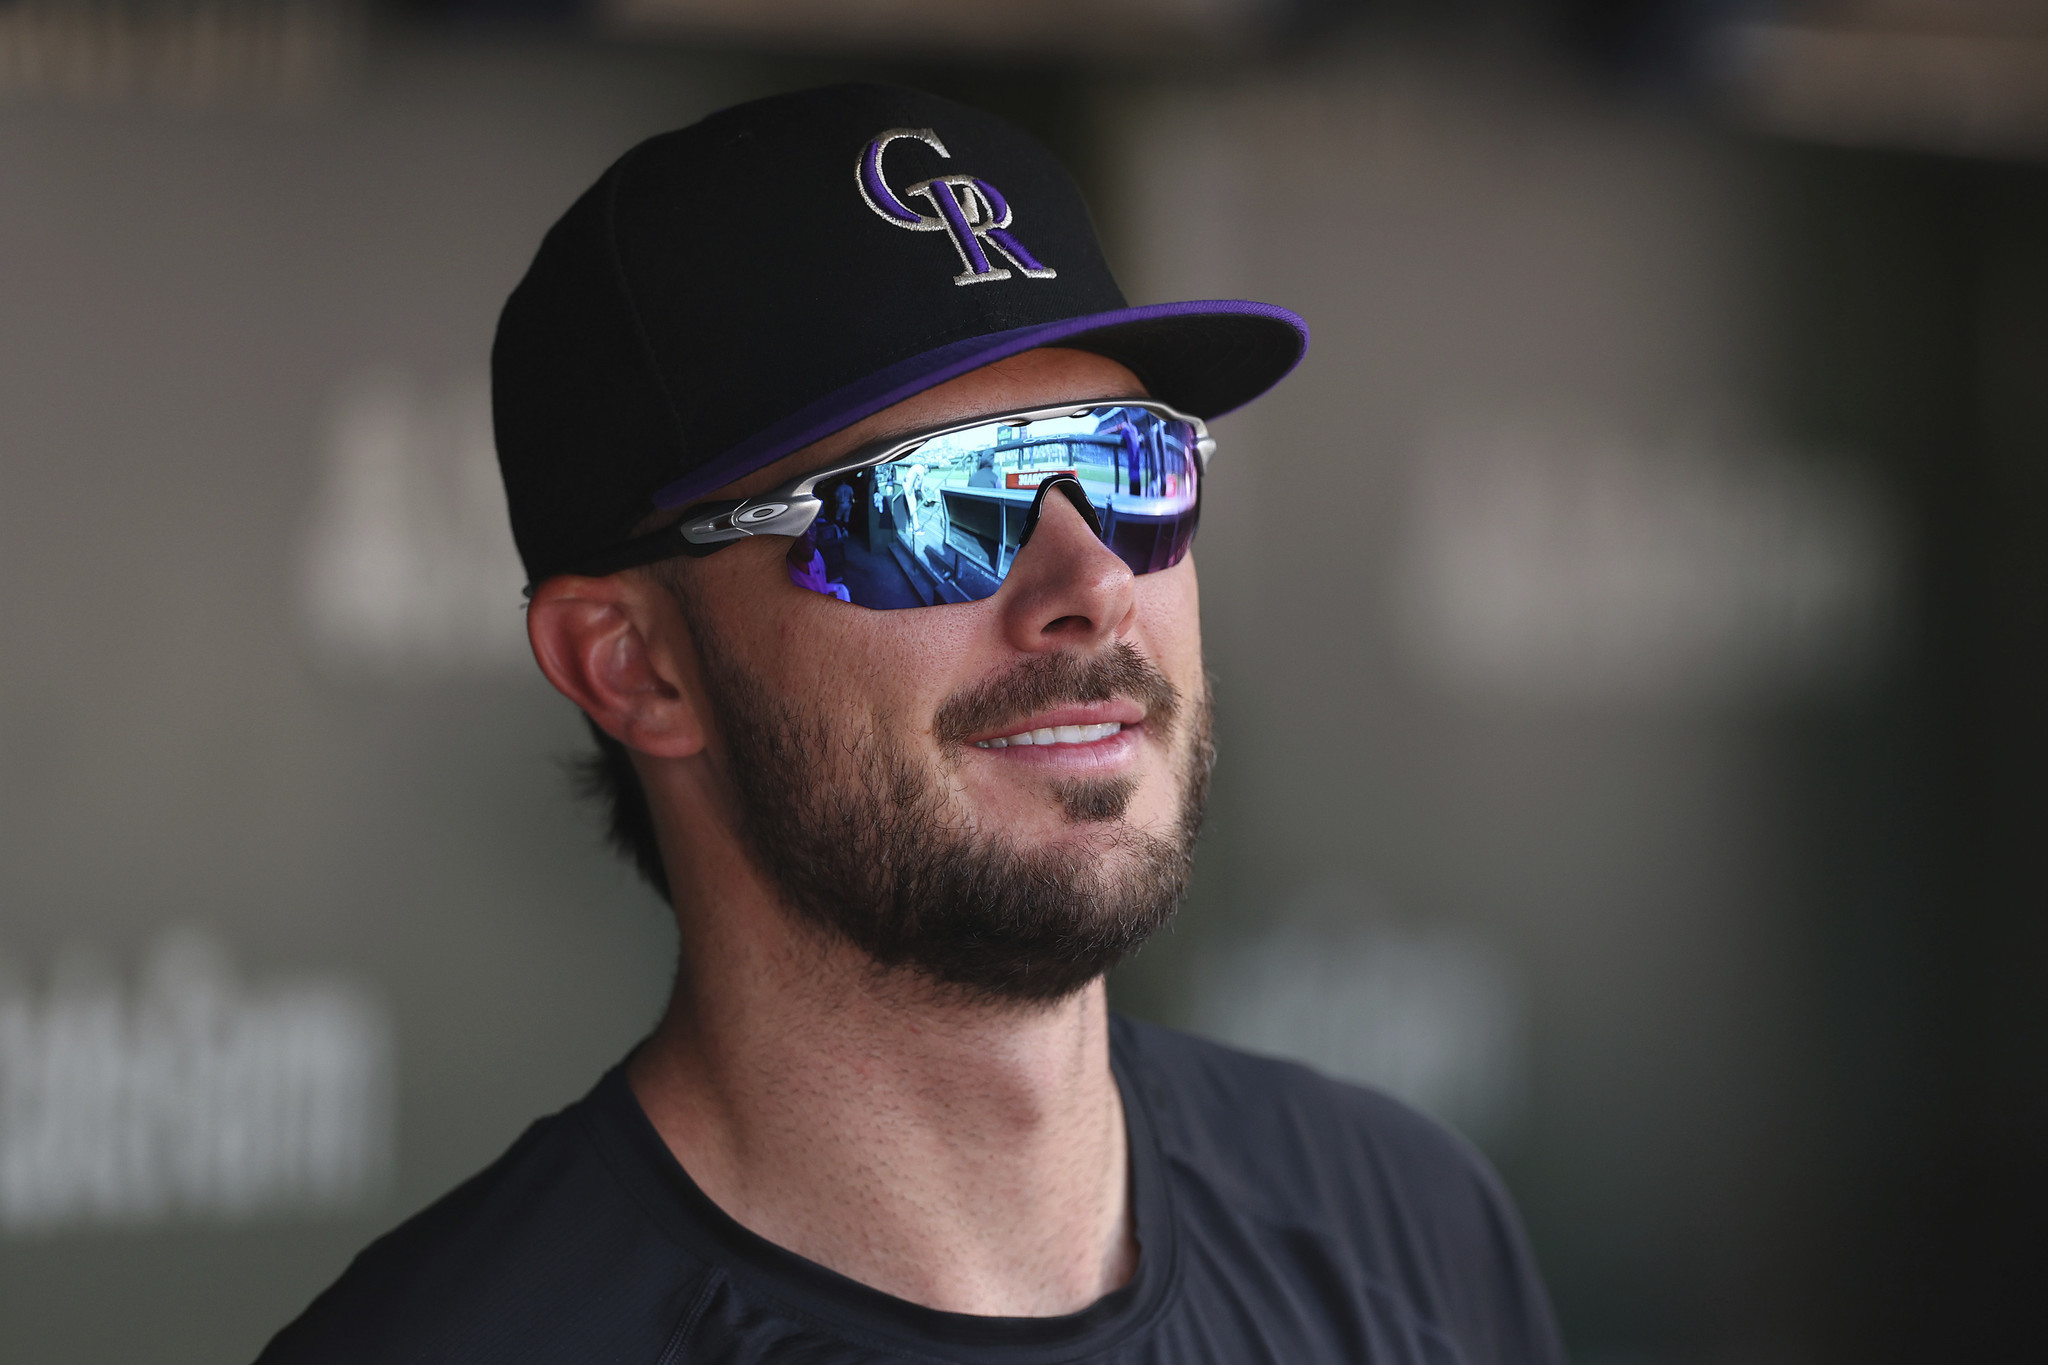 Cubs: 3 reasons chasing Kris Bryant this offseason is a bad idea